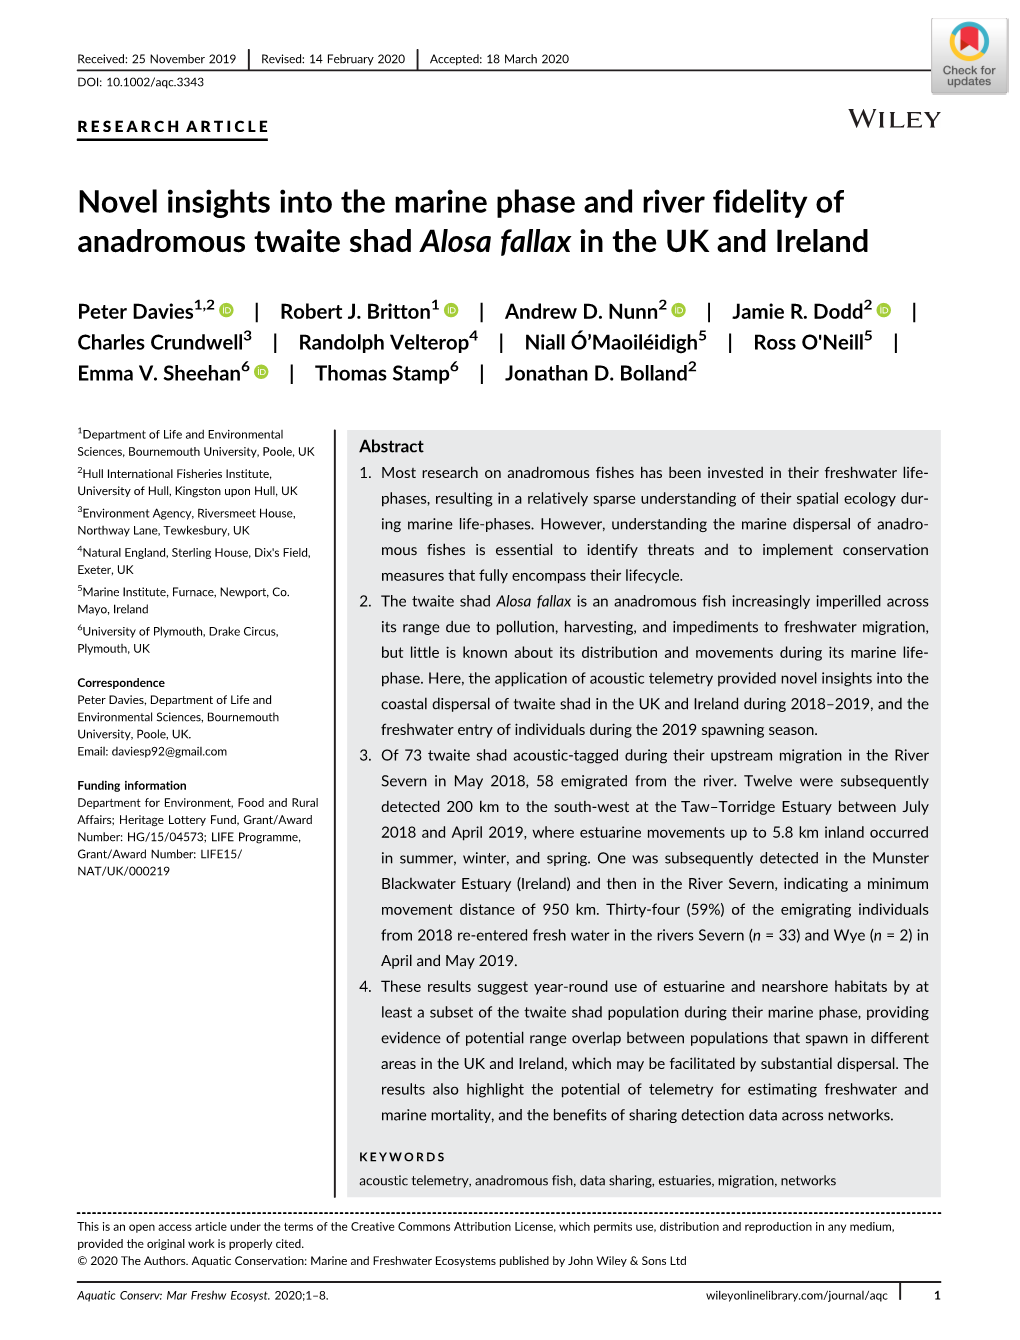 Novel Insights Into the Marine Phase and River Fidelity of Anadromous Twaite Shad Alosa Fallax in the UK and Ireland